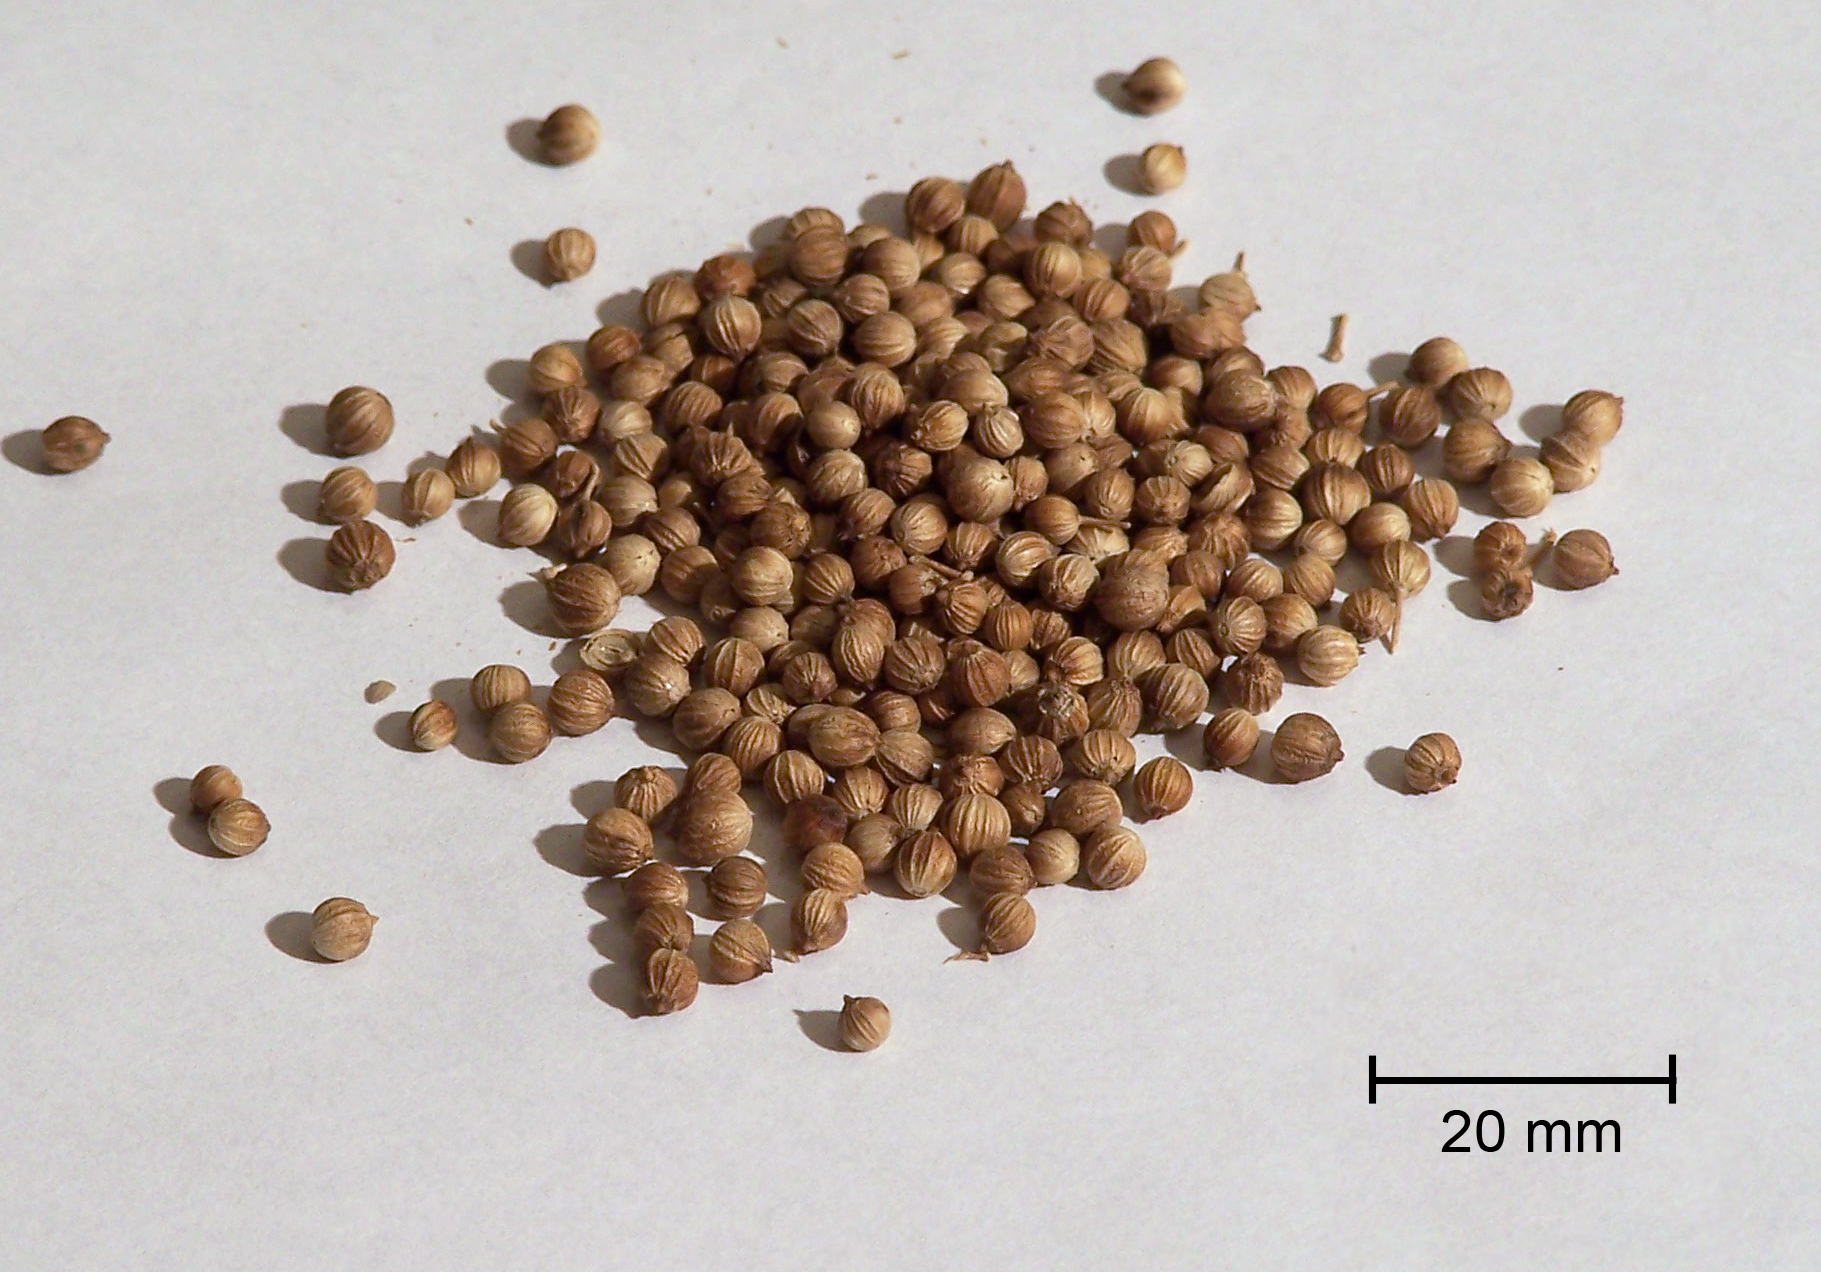 Coriander seed. According to the book of Exodus, manna is like a coriander seed that is white (this is explained by ancient commentaries as a comparison to the round shape of the coriander seed. Credit: The original uploader was Novalis at English Wikipedia Later versions were uploaded by Consequencefree at en.wikipedia. - [1], CC BY-SA 3.0, https://commons.wikimedia.org/w/index.php?curid=1468665